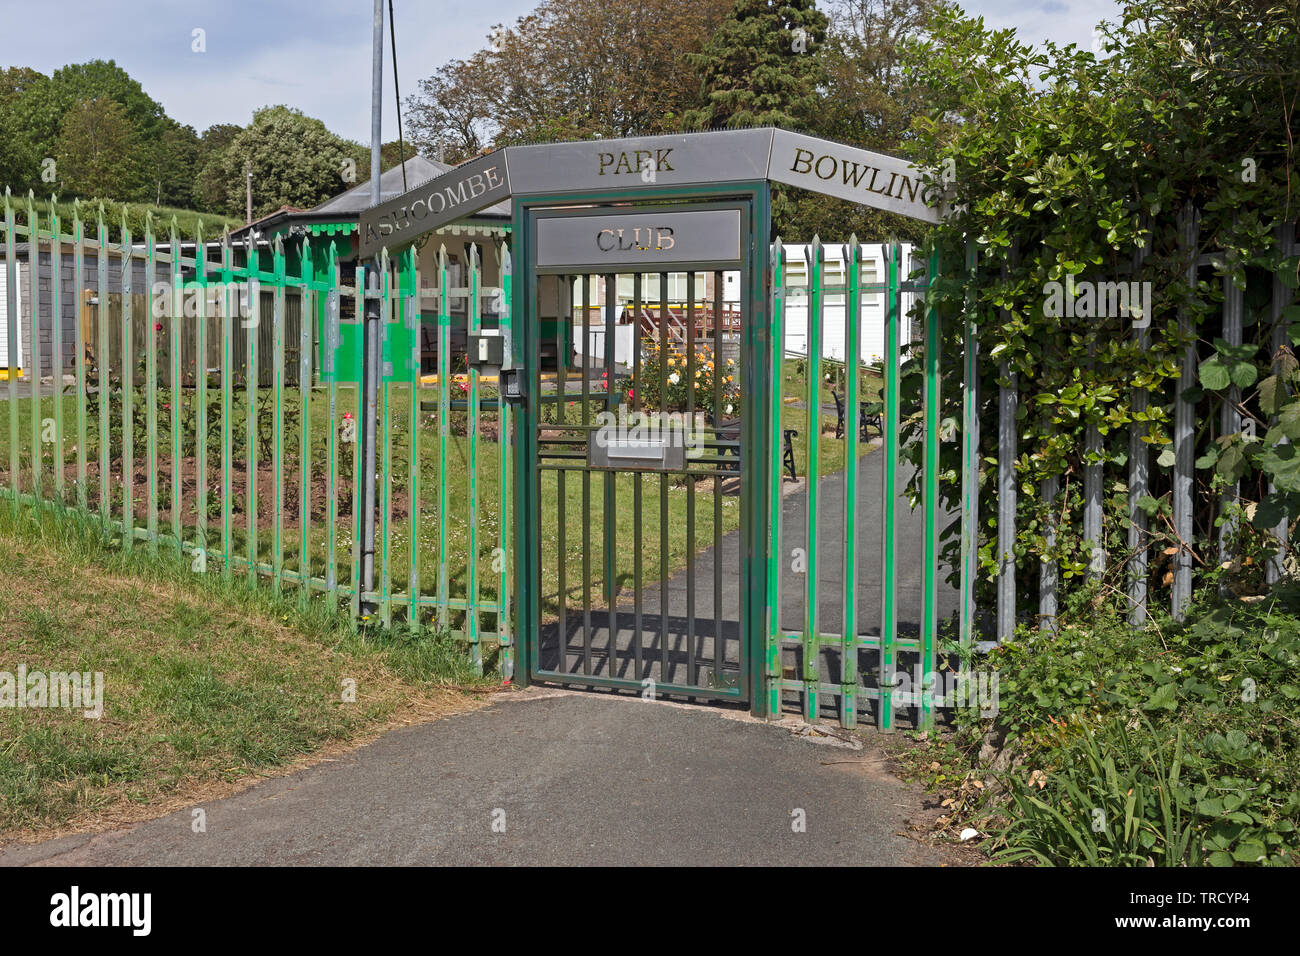 The entrance to Ashcombe Park Bowling Club in Weston-super-Mare, UK. Stock Photo